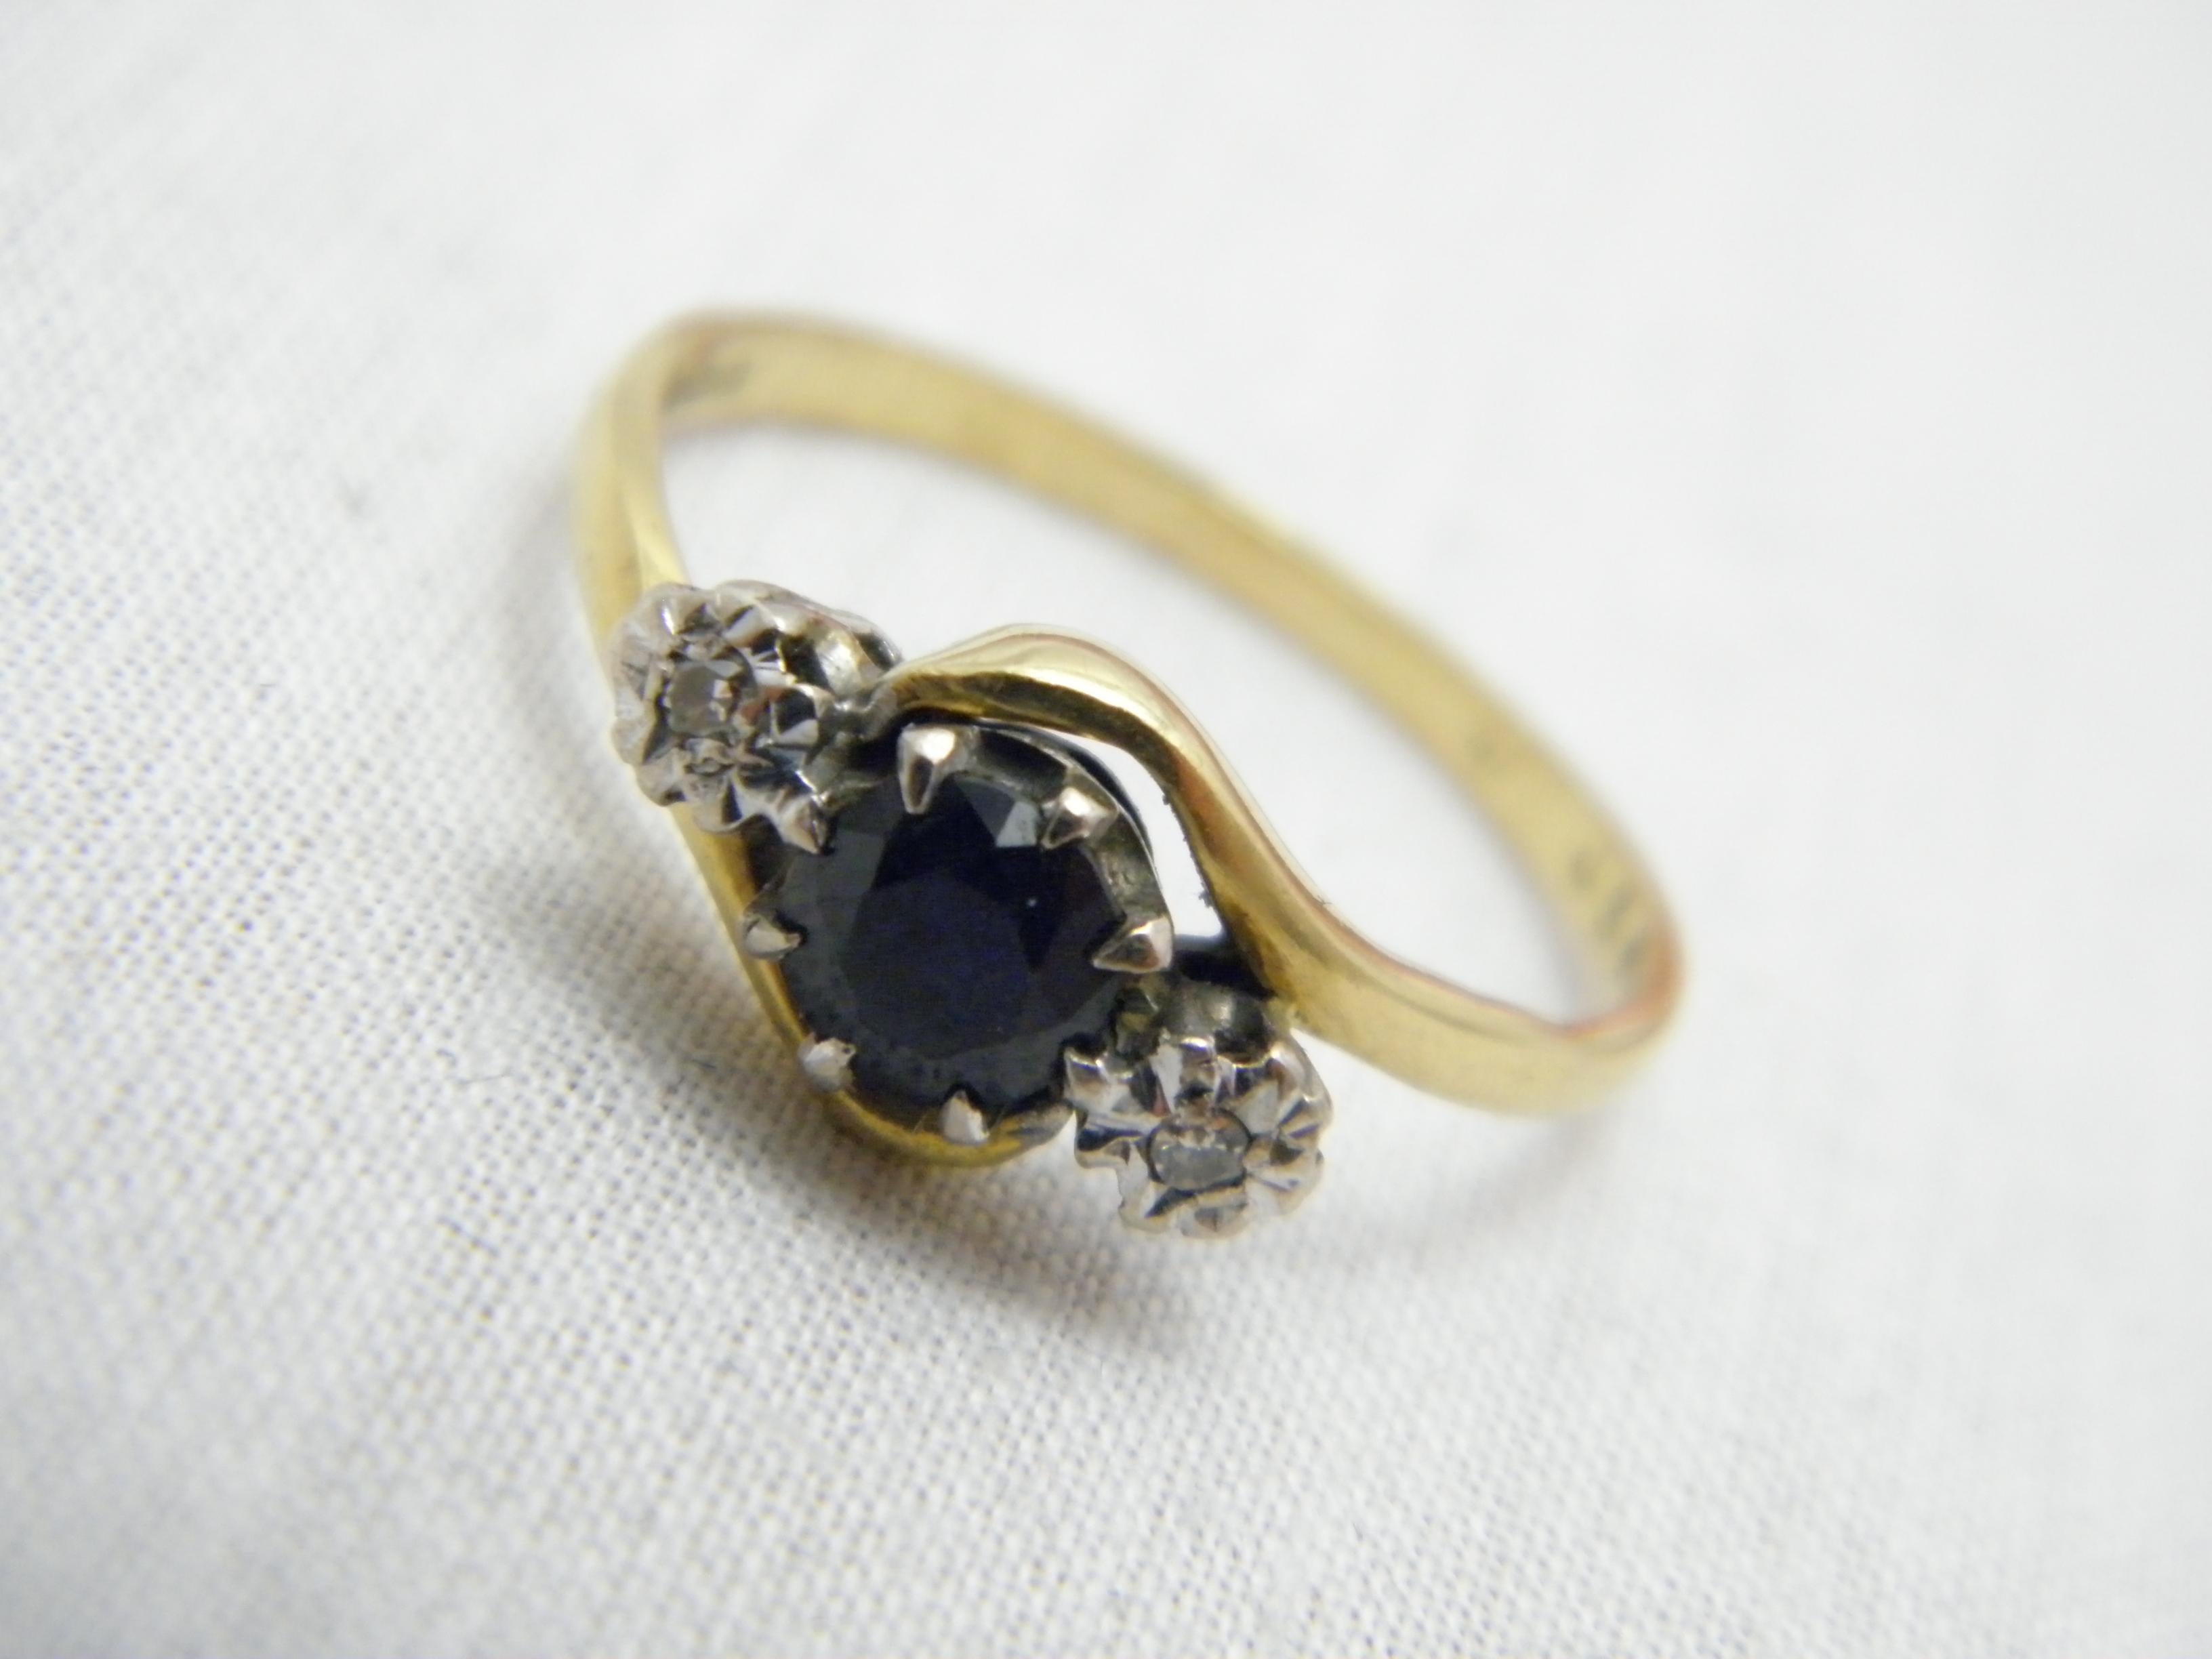 If you have landed on this page then you have an eye for beauty.

On offer is this gorgeous
18CT GOLD SAPPHIRE DIAMOND BYPASS TRILOGY ENGAGEMENT RING

Crafted from solid 18ct Yellow Gold (750/000) with a White Gold mount
and fully assay marked in